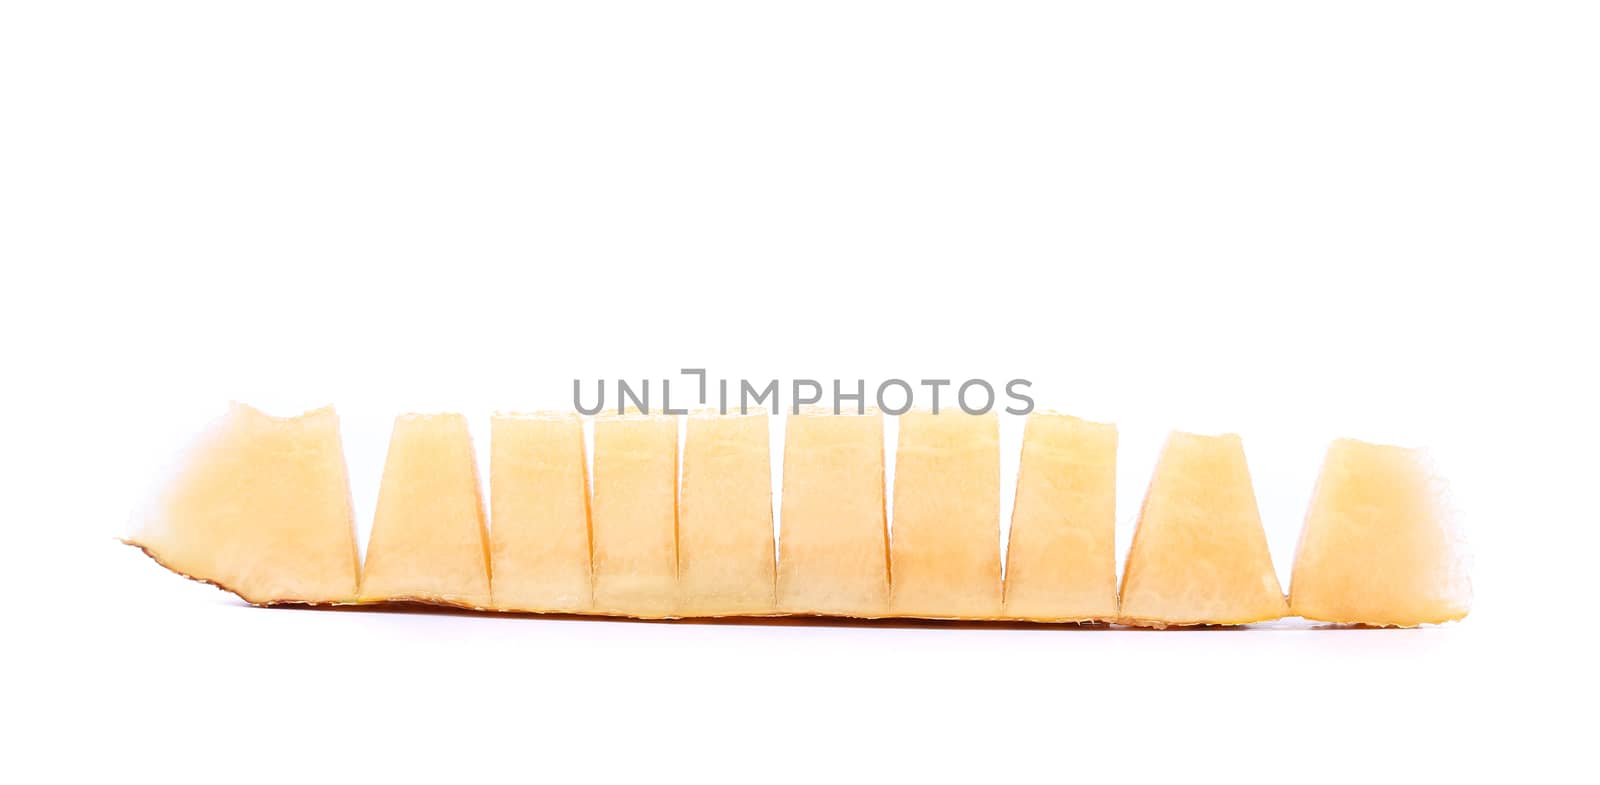 Melon slice cuted close up on a white background by indigolotos